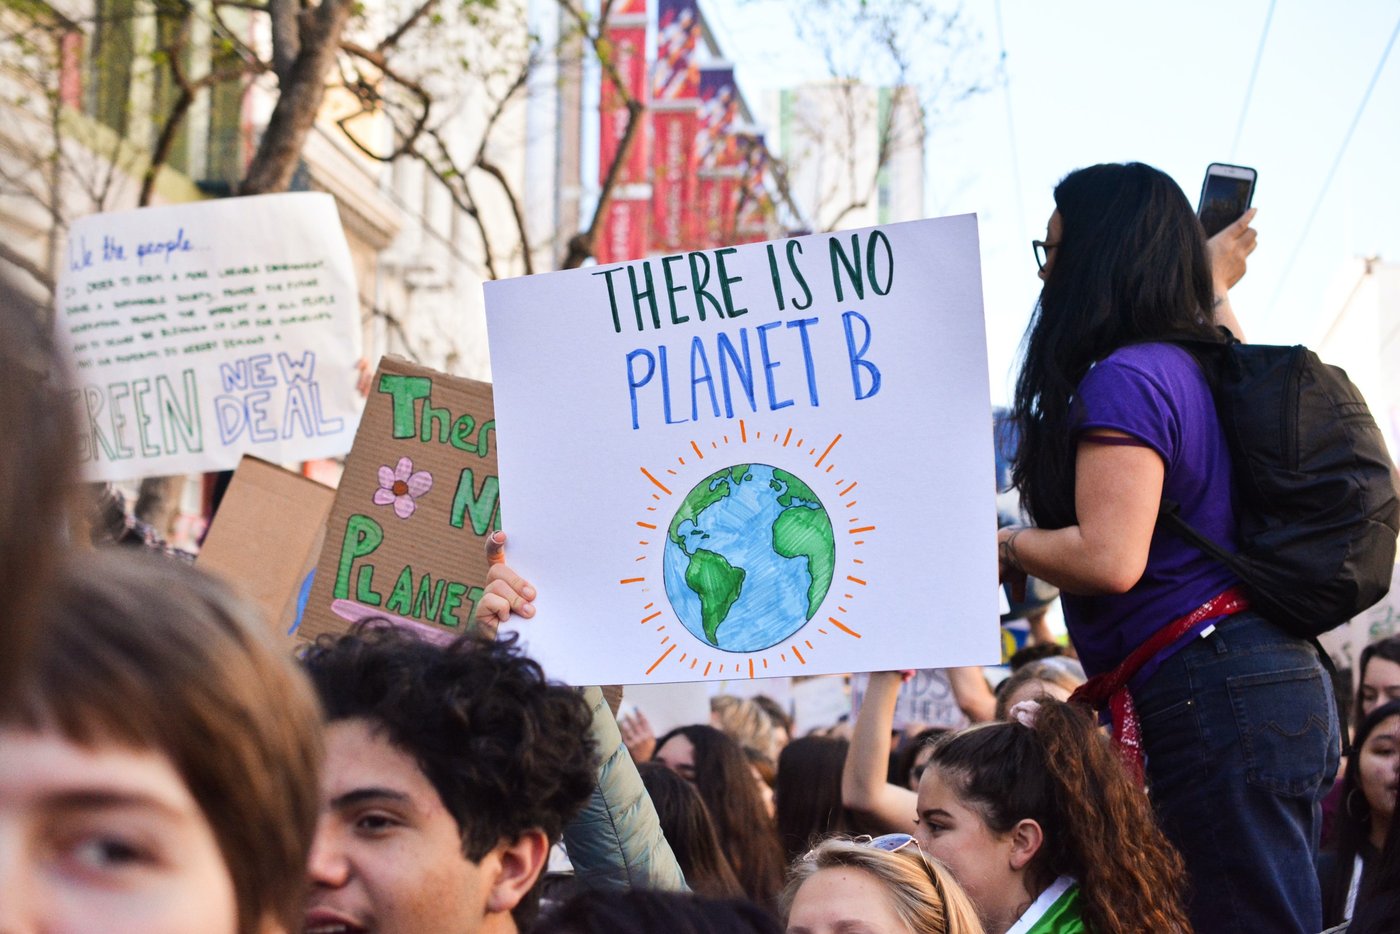 The photo shows young people at a demonstration. In the centre is a sign that says "There is no planet B" with an illustration of planet Earth underneath. 